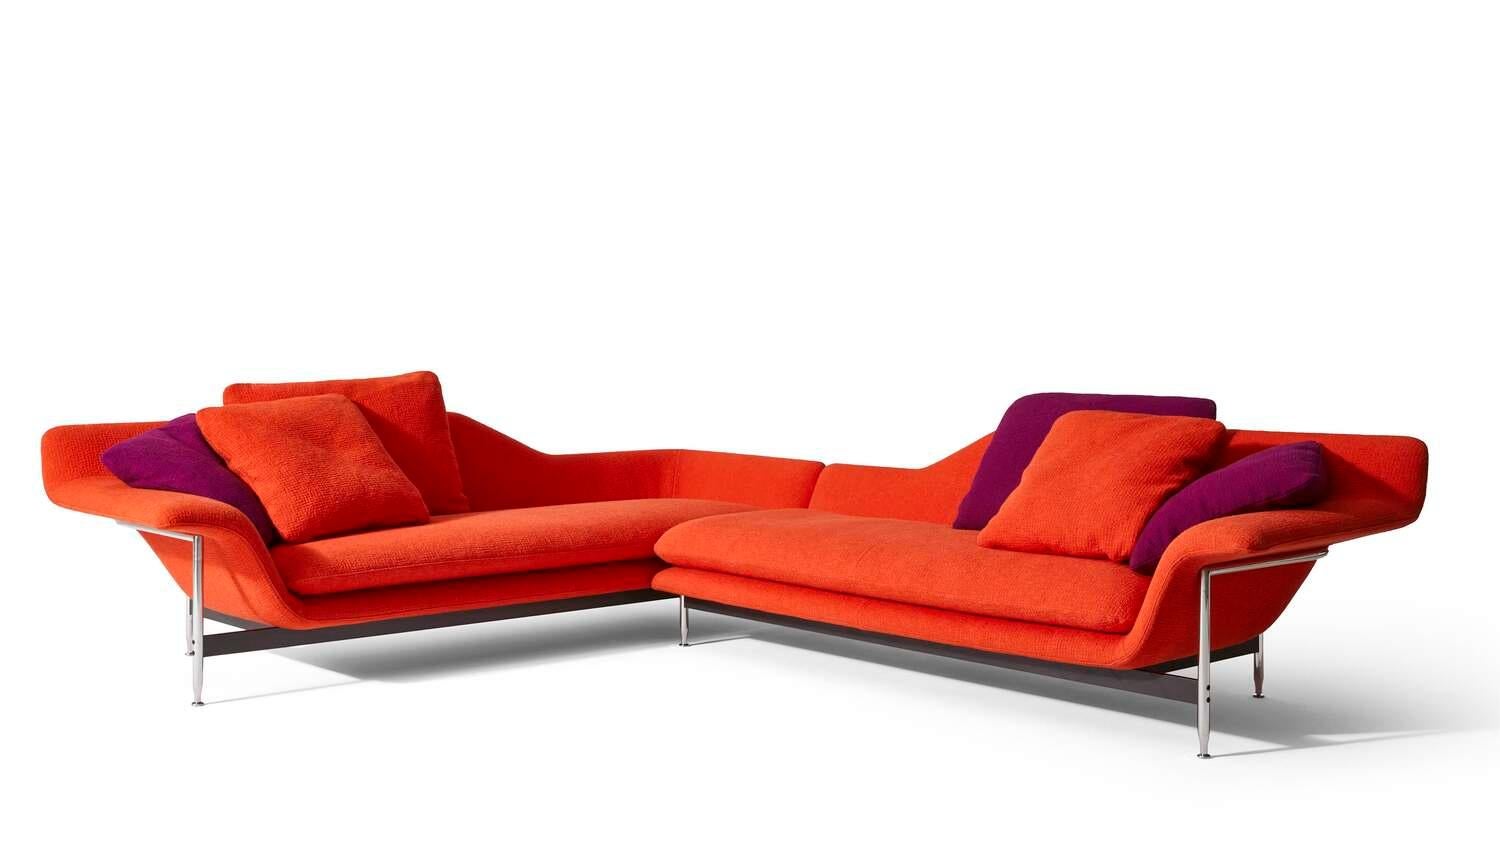 Antonio Citterio Esosoft sofa
Manufactured by Cassina in Itlay

A living room system designed to define the domestic landscape in a fluid, flexible manner. This is Esosoft ? the first project by Antonio Citterio for Cassina ? a modular sofa that